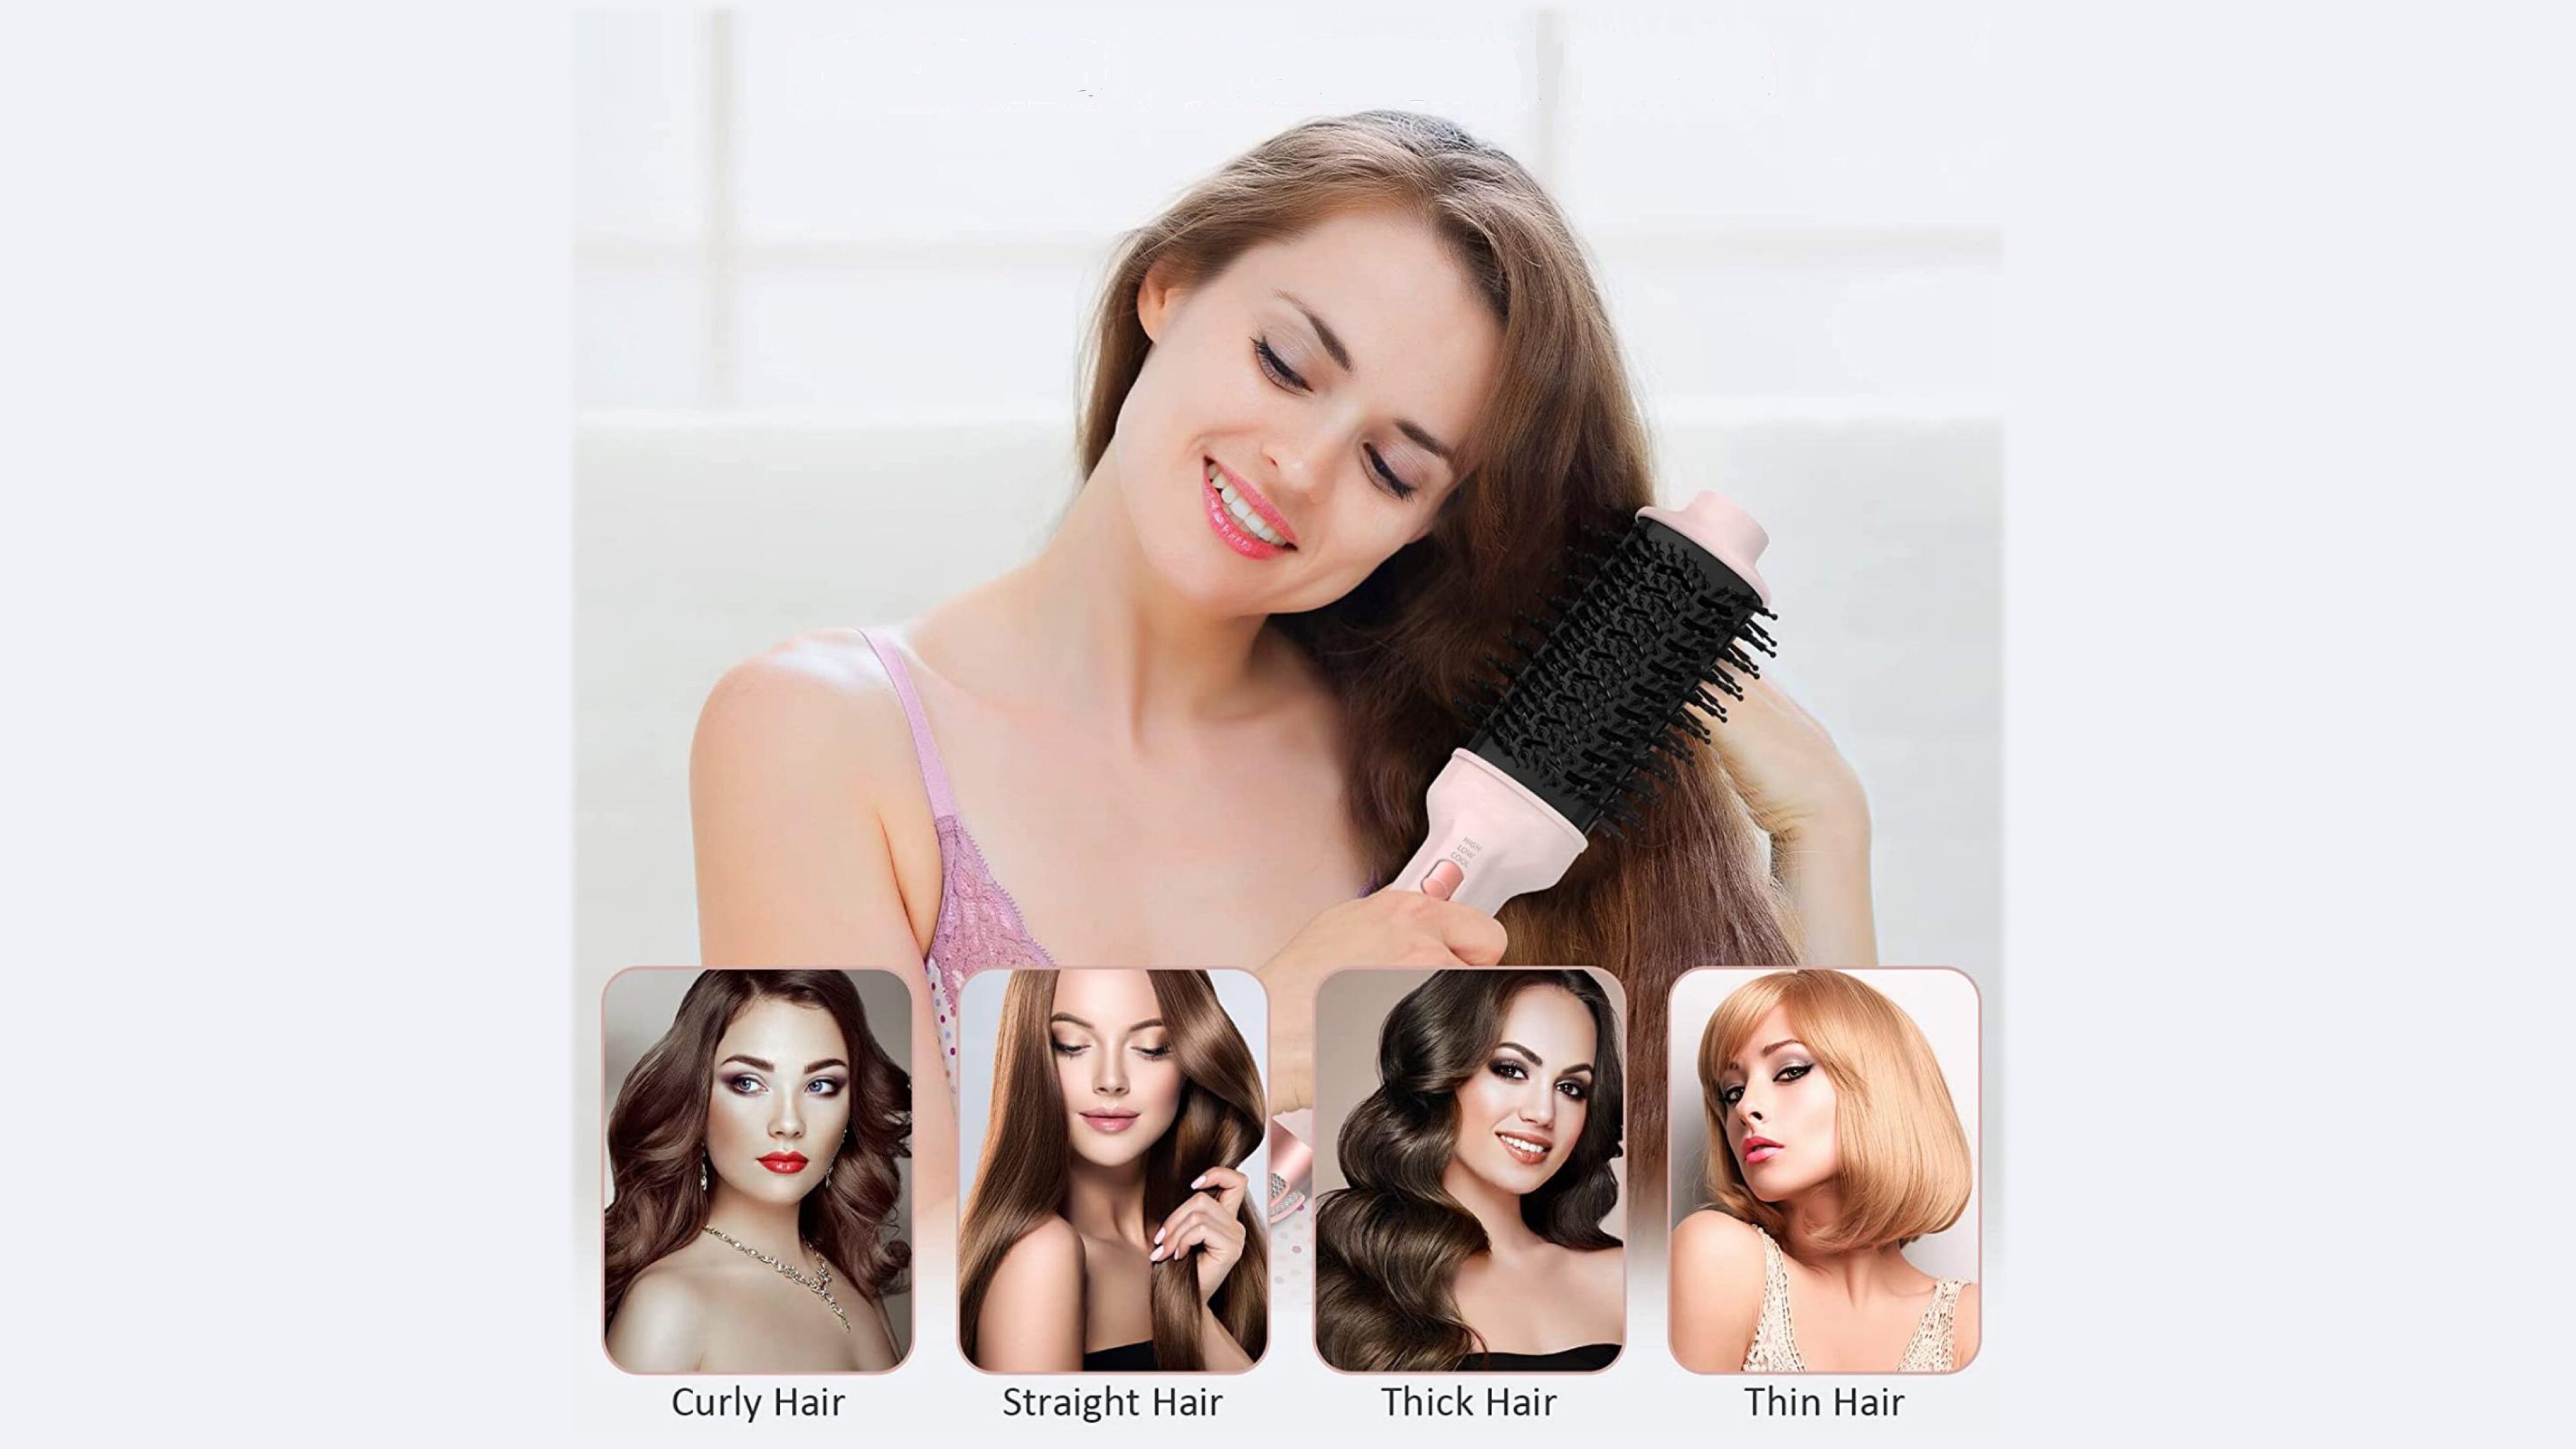 How to Use and Precautions for Hair Dryer Brush?